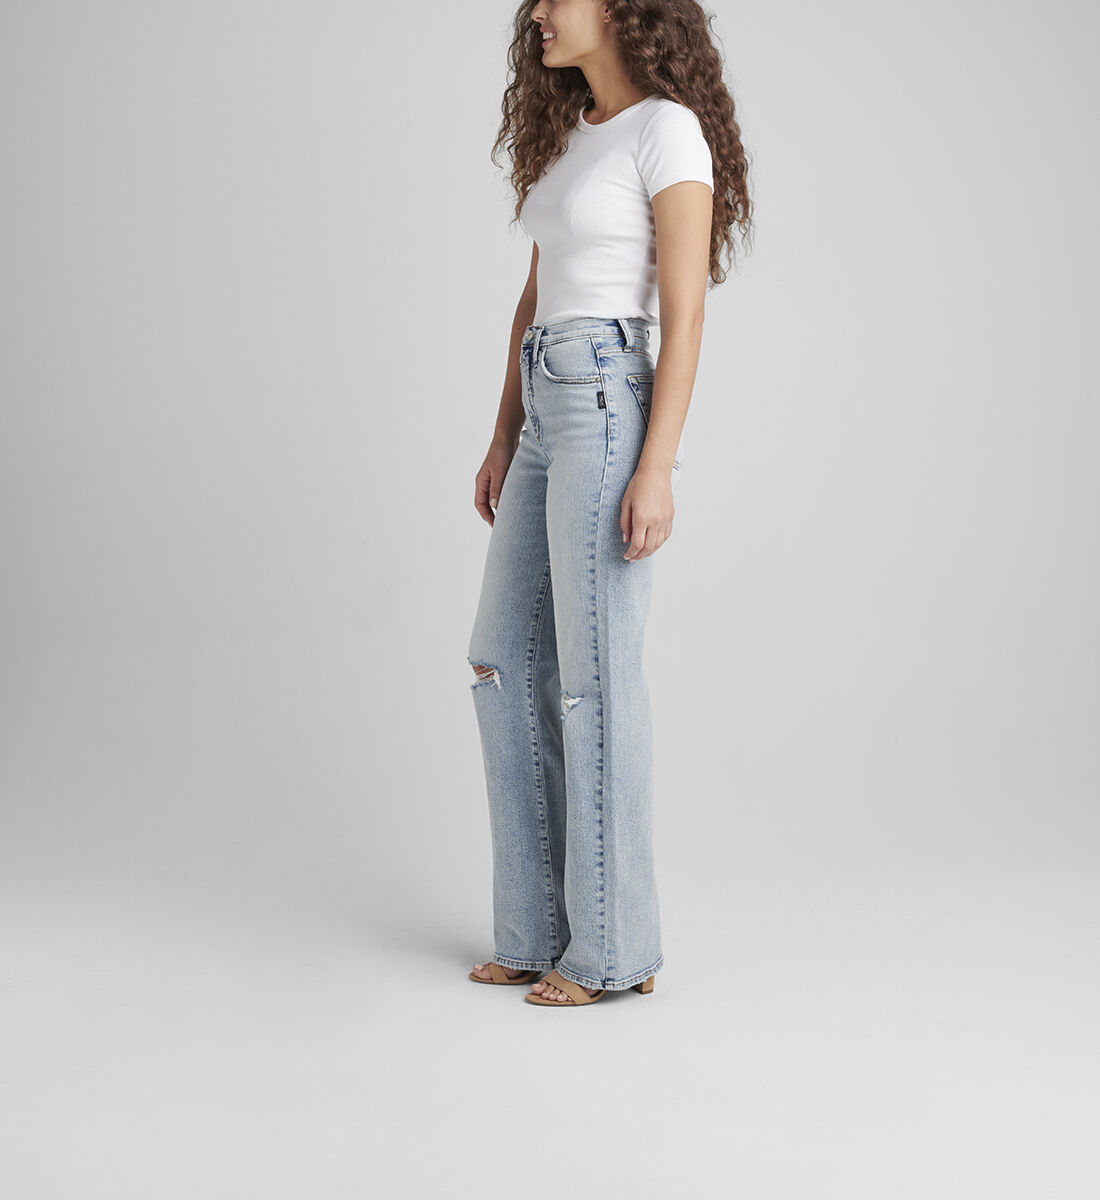 Highly Desirable High Rise Trouser Leg Jeans Side